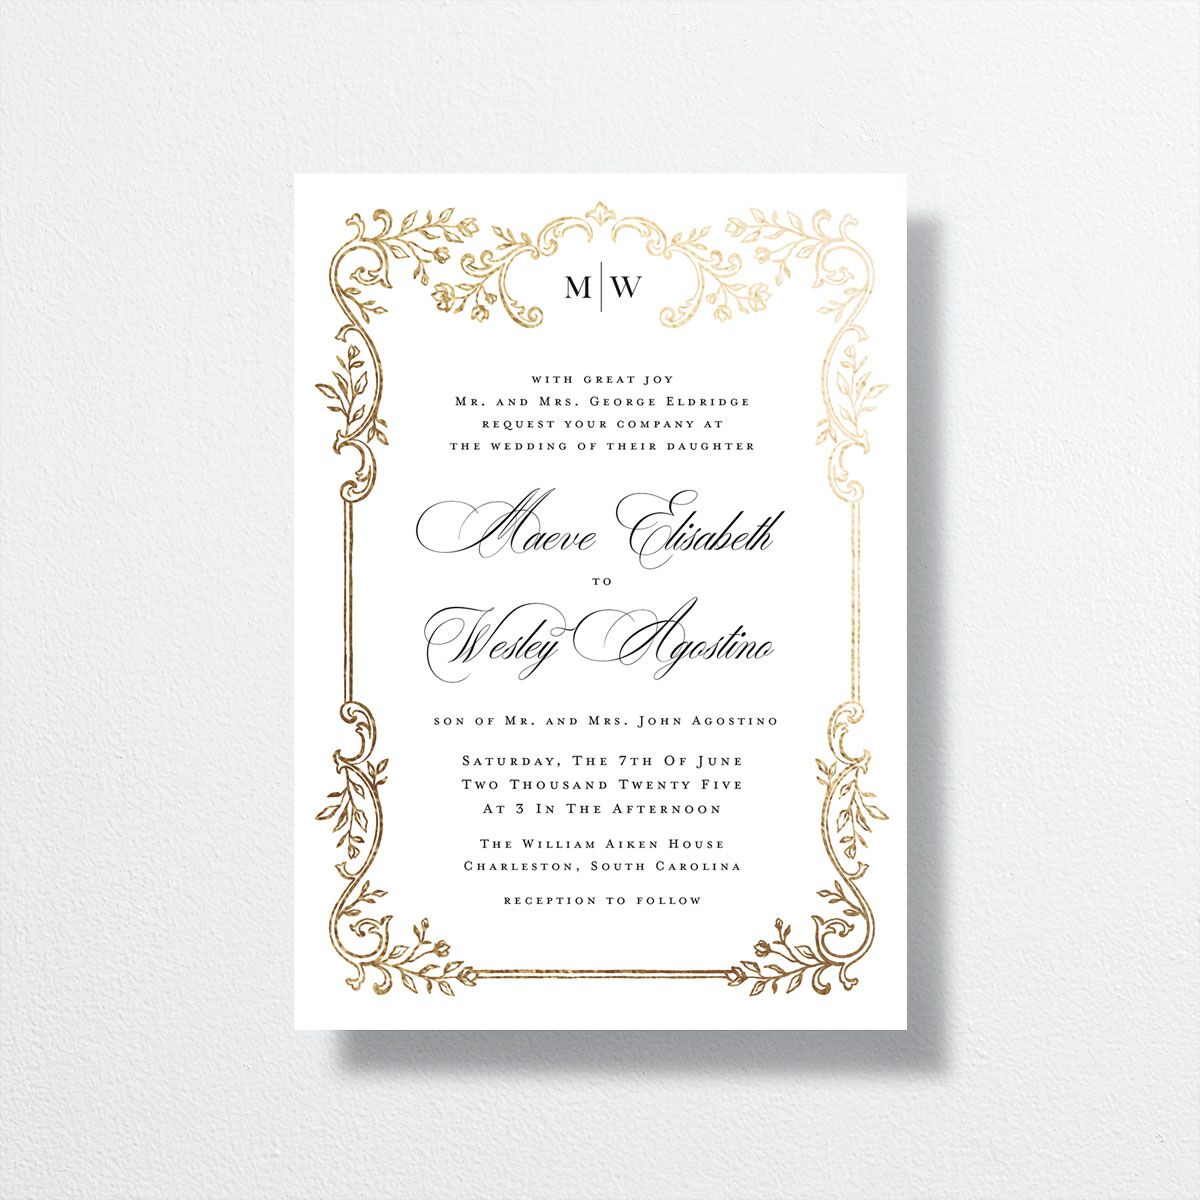 Opulences Wedding Invitations by Vera Wang front in white